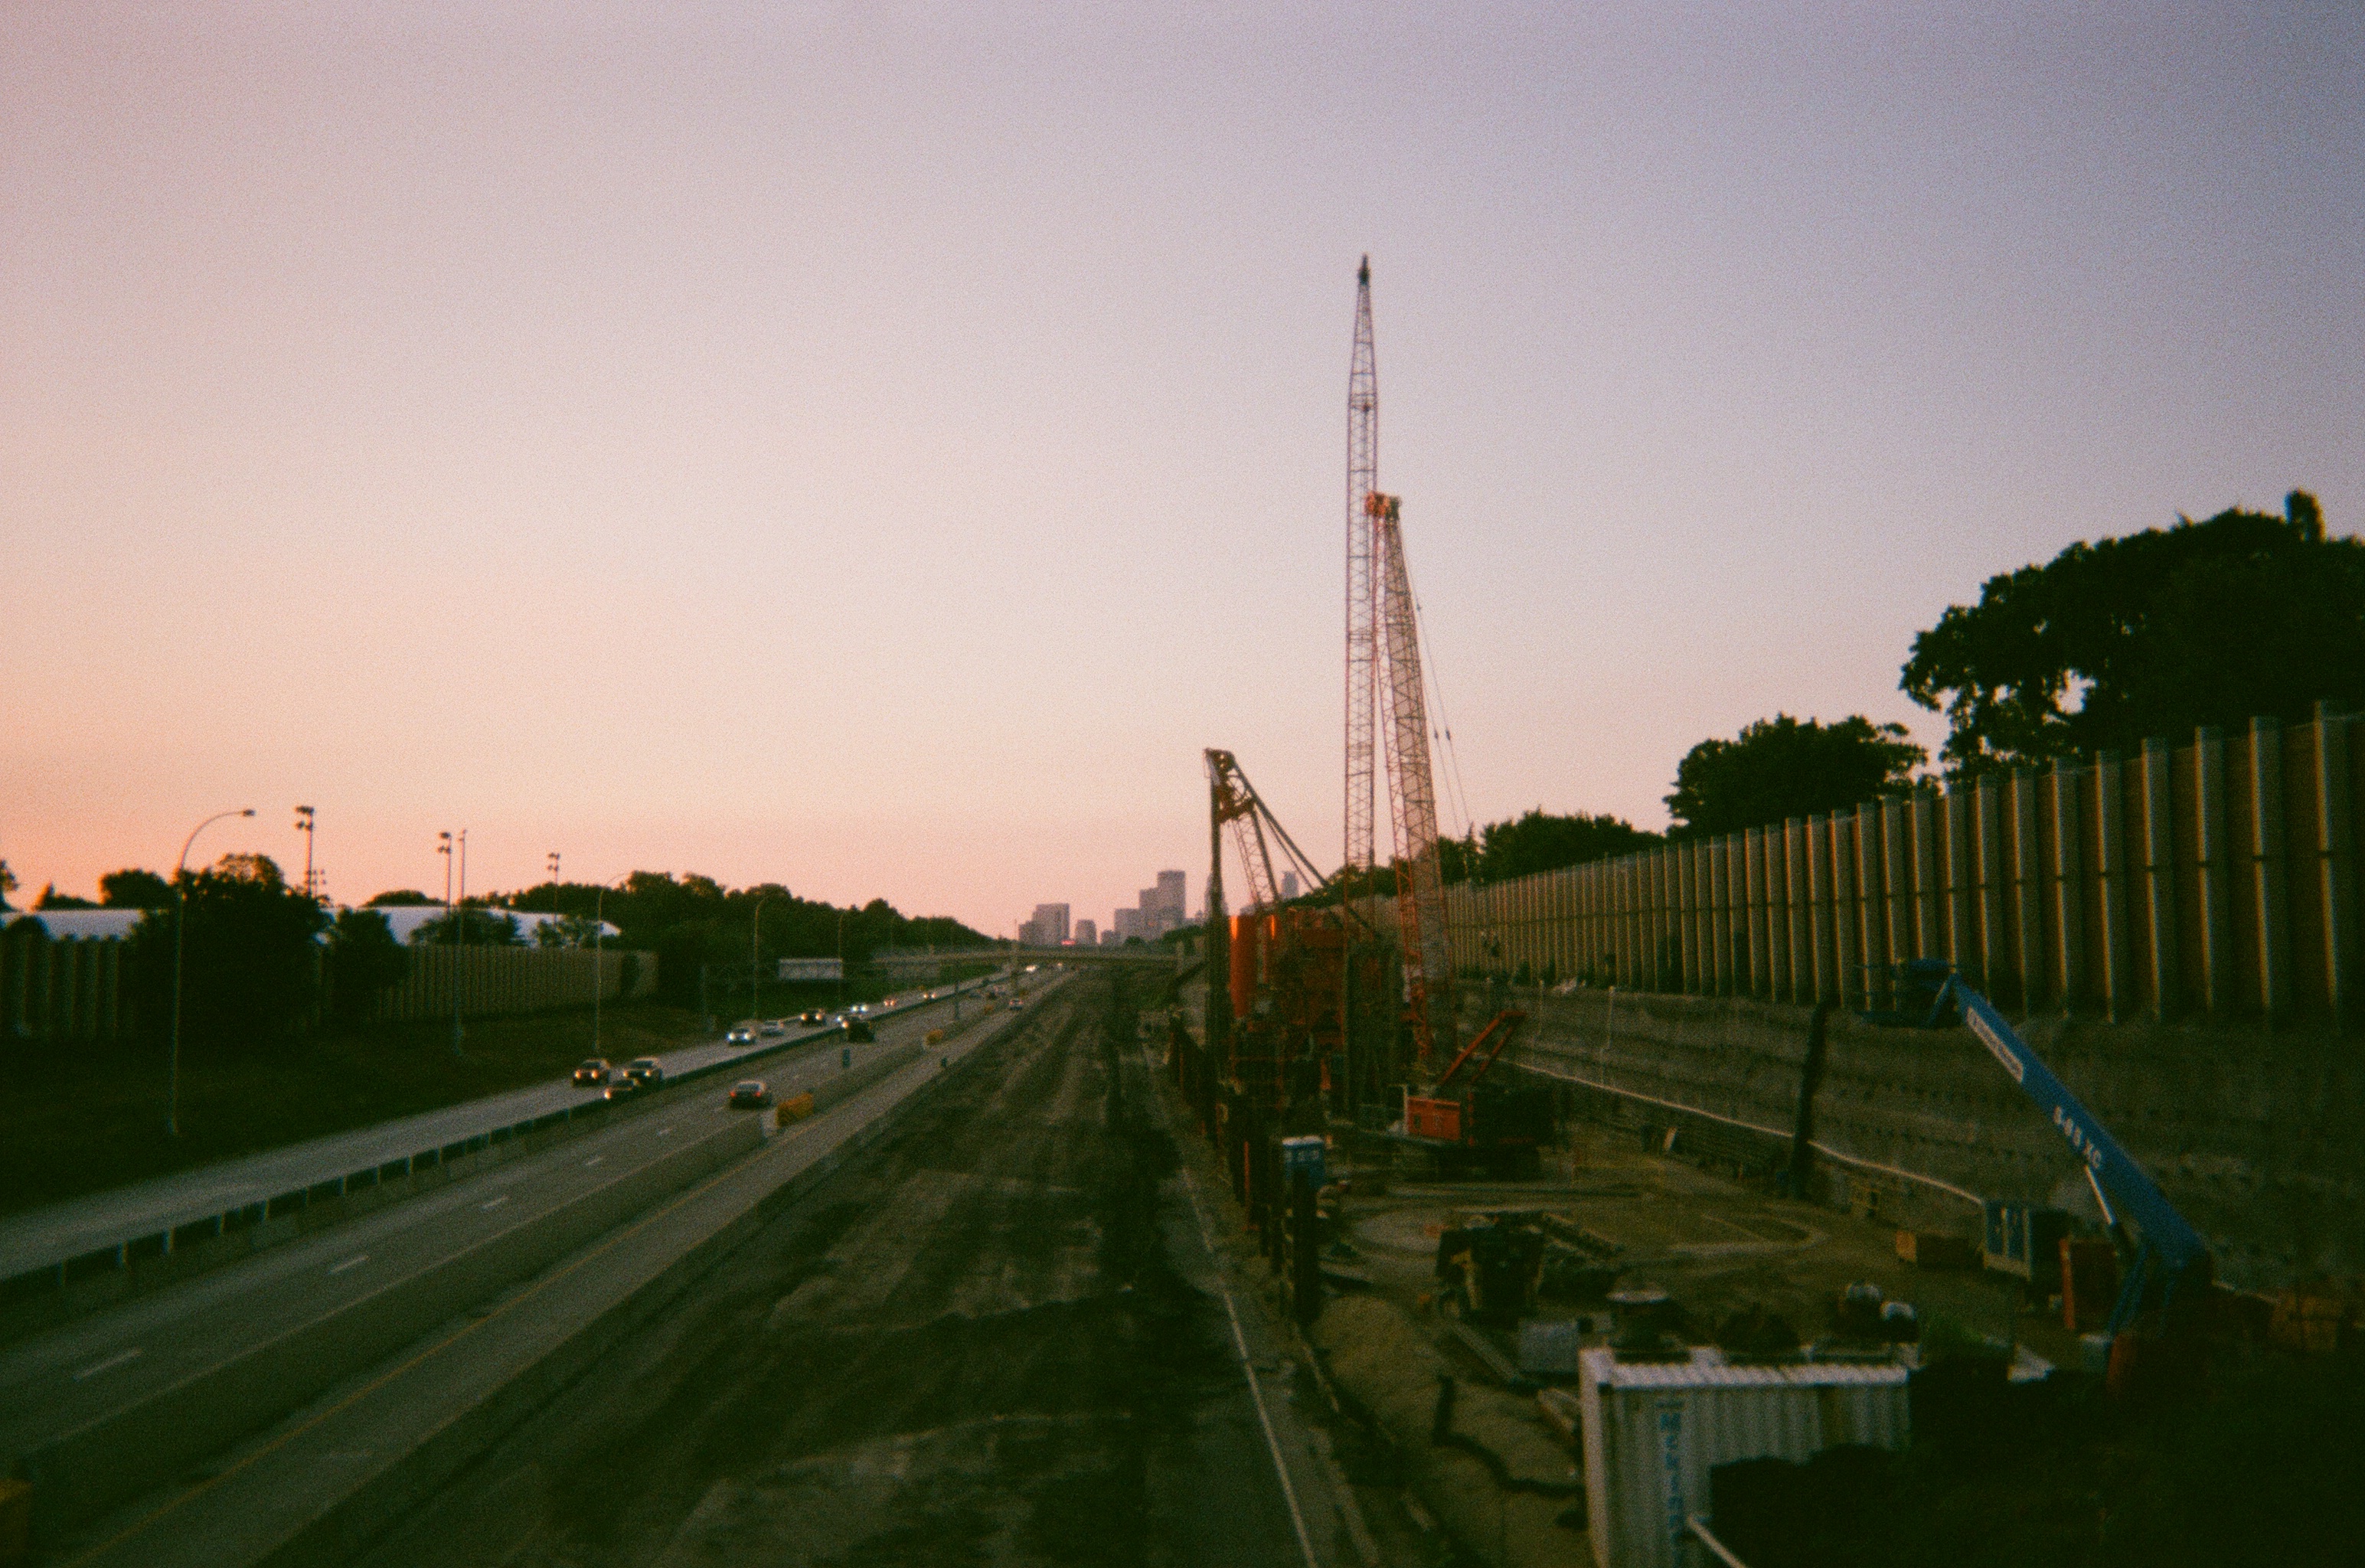 view of highway construction with city skyline visible